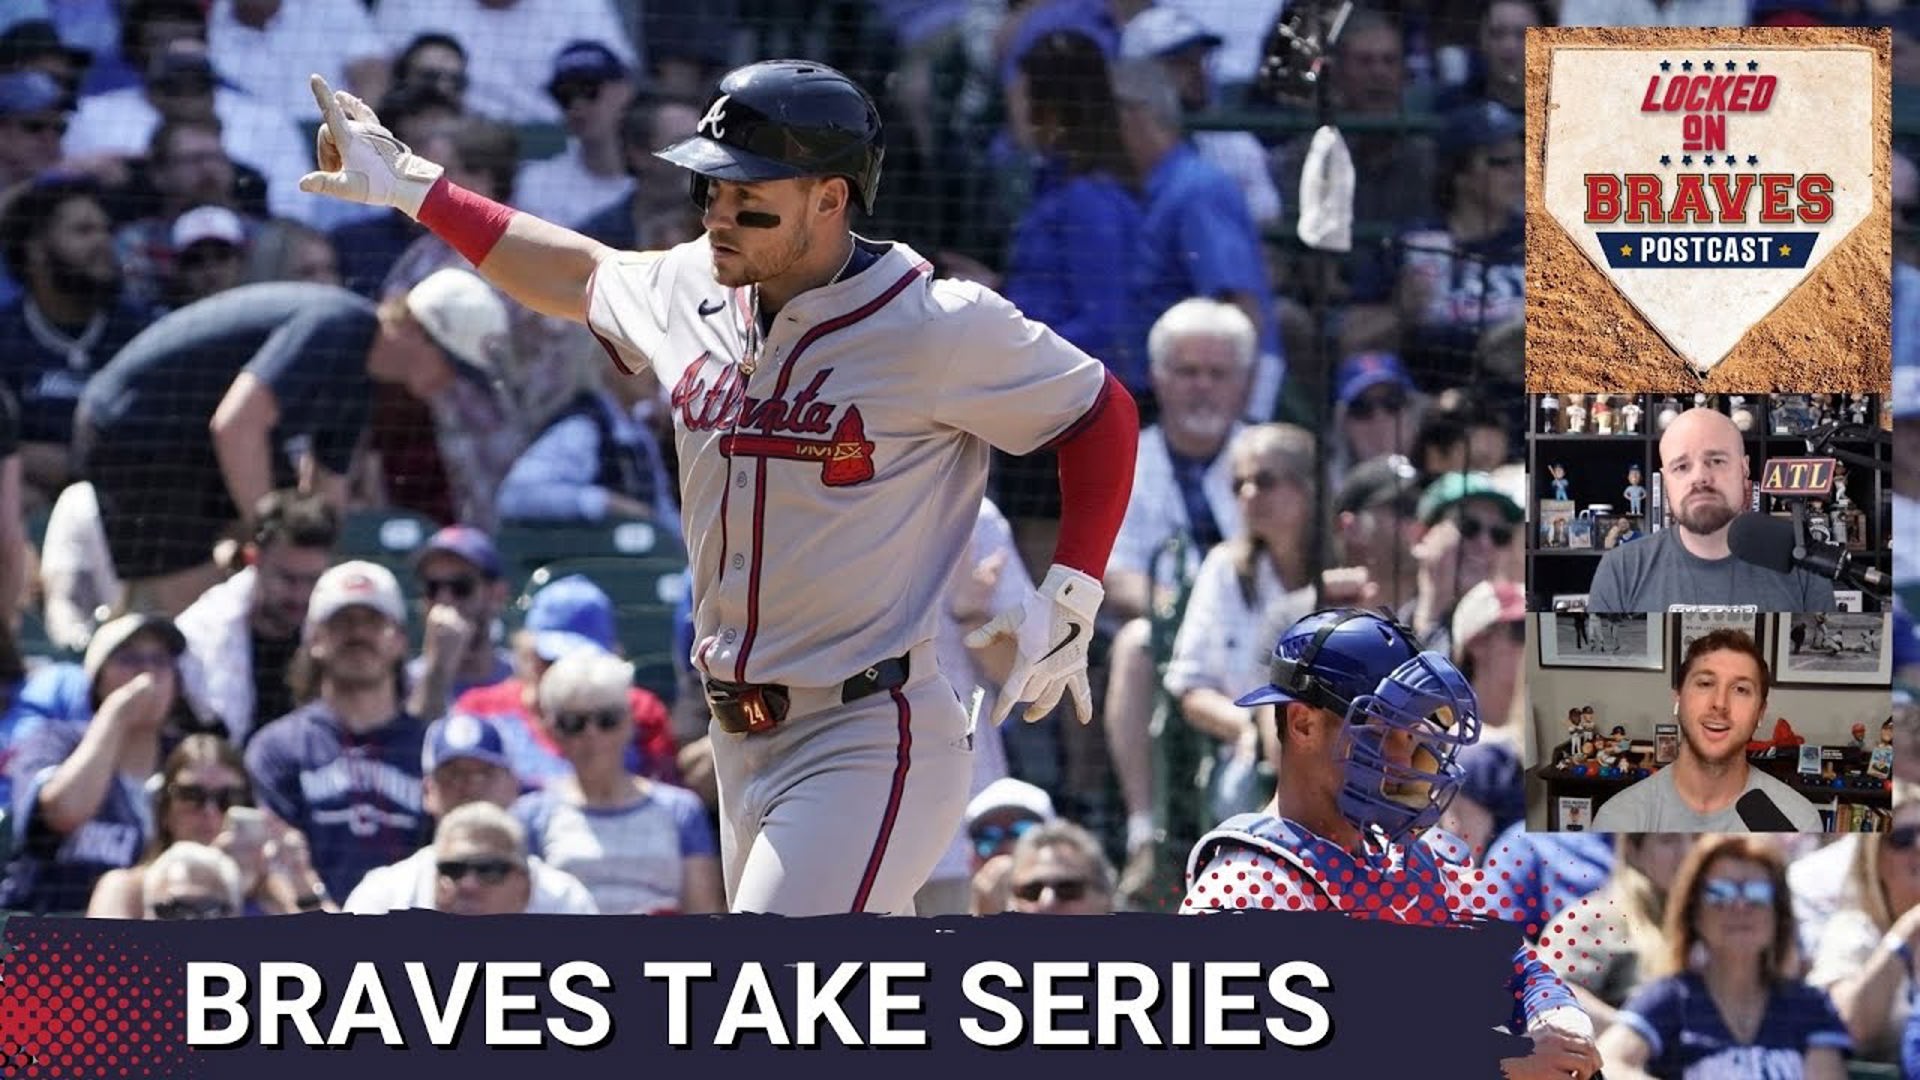 Six pitchers combined for yet another shutout as the Atlanta Braves blanked the Chicago Cubs by a 3-0 score on Thursday en route to a series victory at Wrigley Field